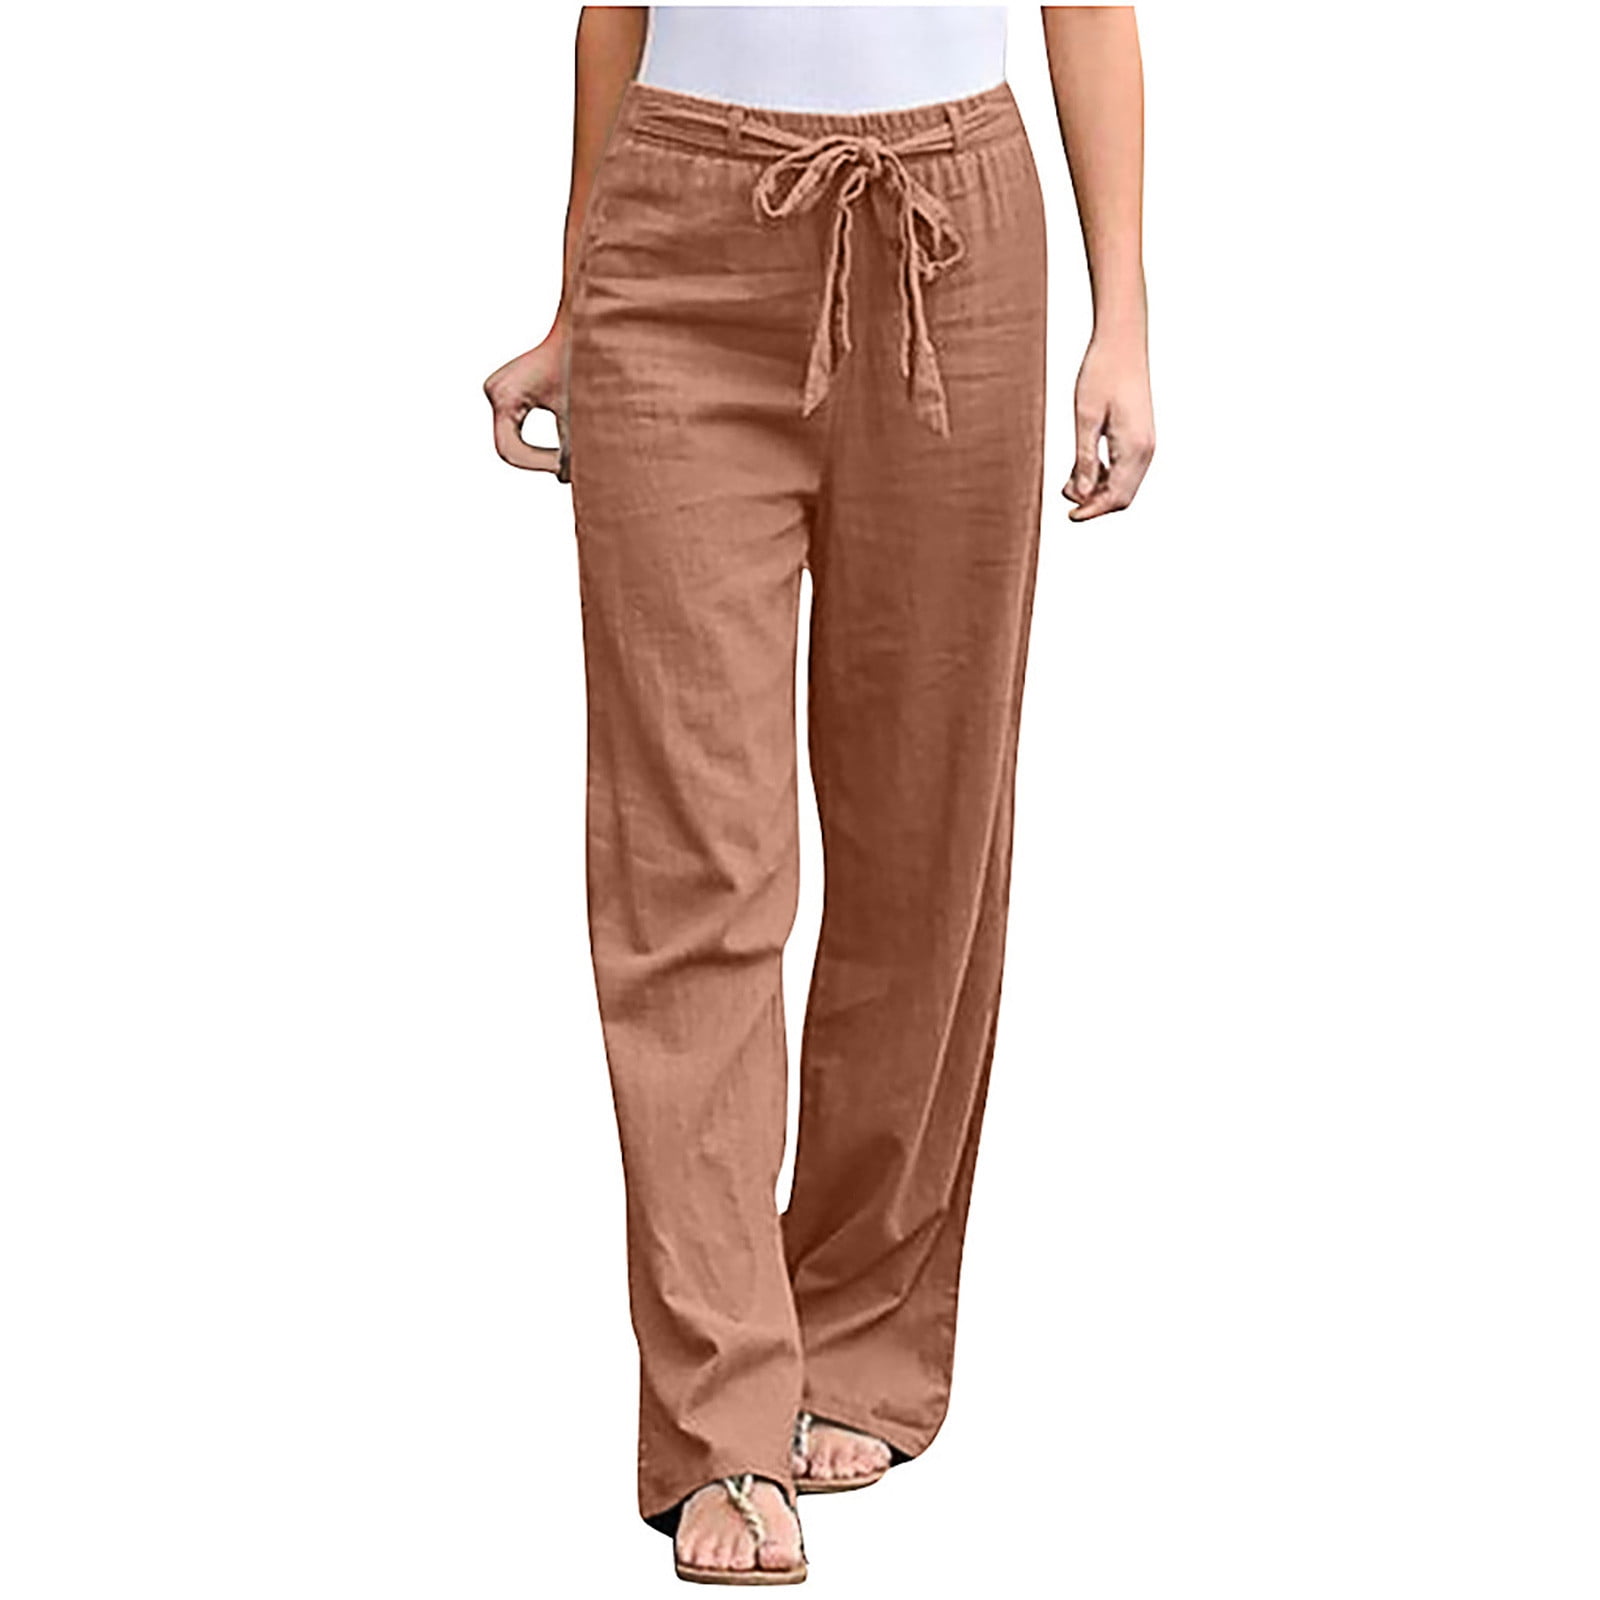 HTNBO Plus Size Hiking Pants Women Casual Solid Color Drawstring Elastic  Waist Pant Comfy Wide Leg Straight Long Trousers 